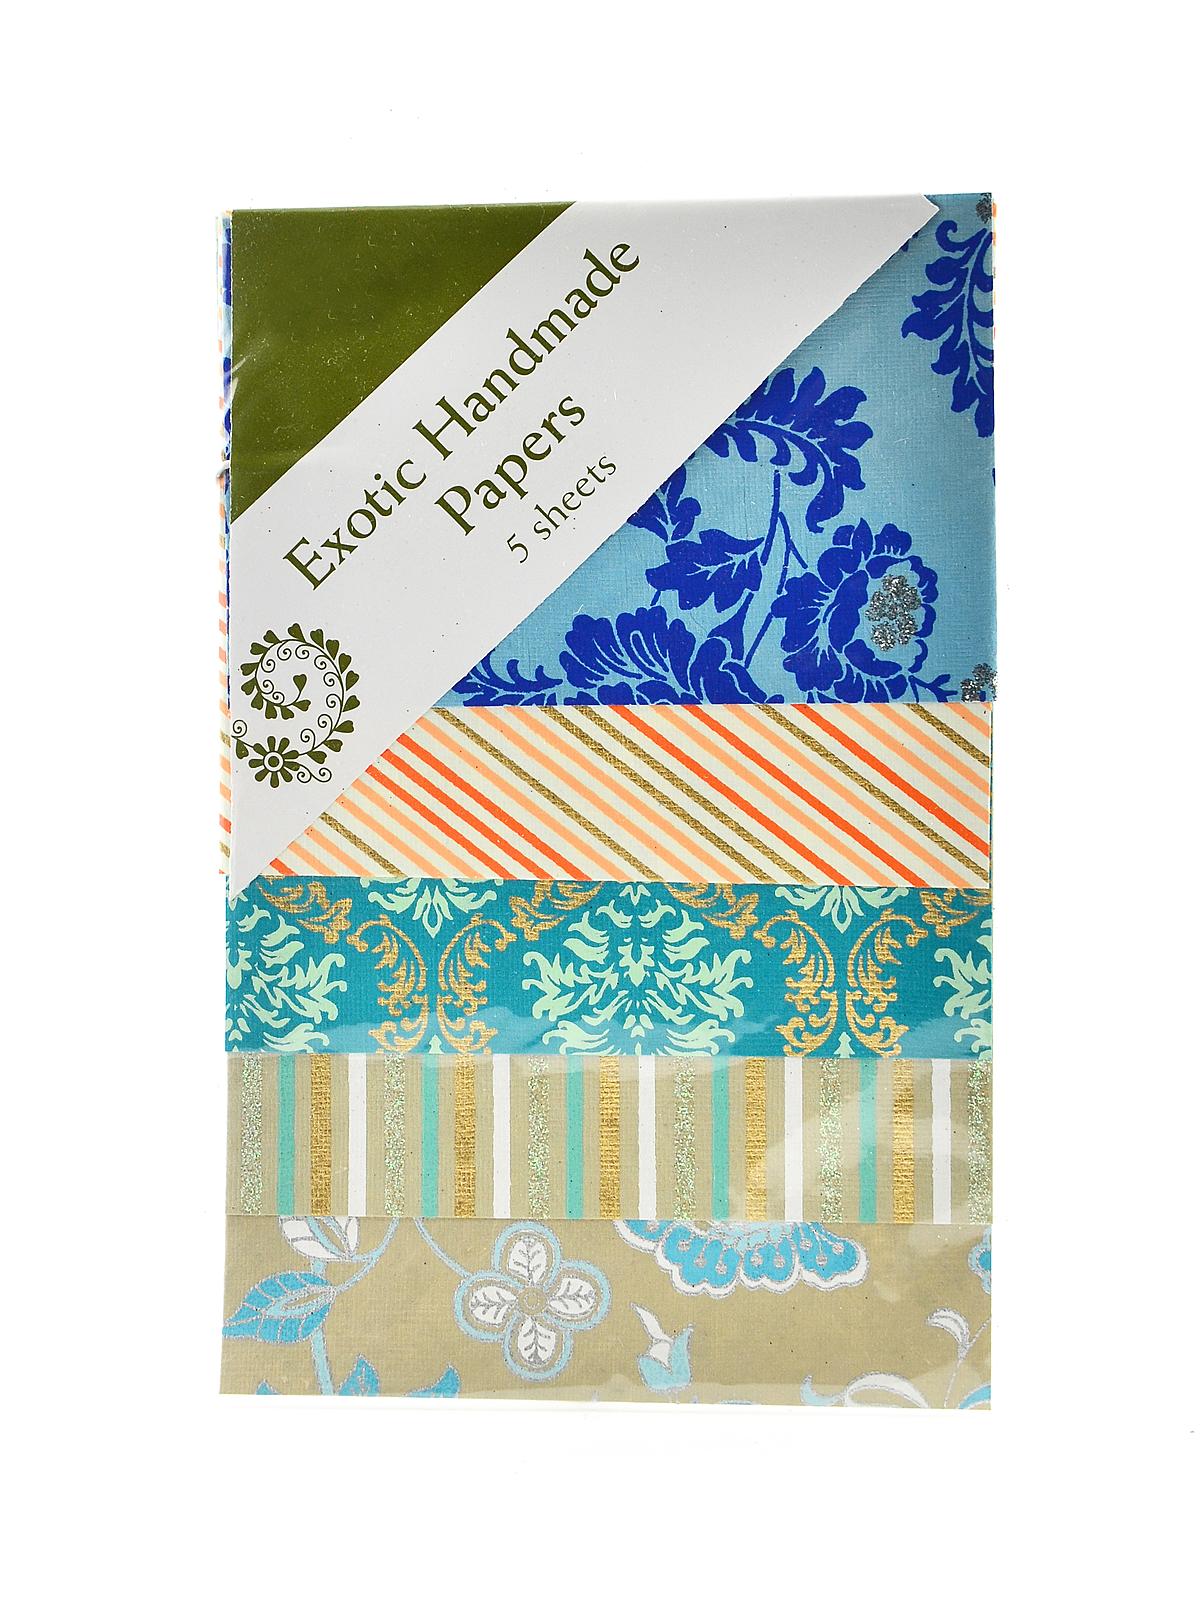 Decorative Collage Paper 3 1 2 In. X 5 1 2 In. To 8 1 2 In. X 5 1 2 In. Assorted Mini Pack Of 5 Sheets